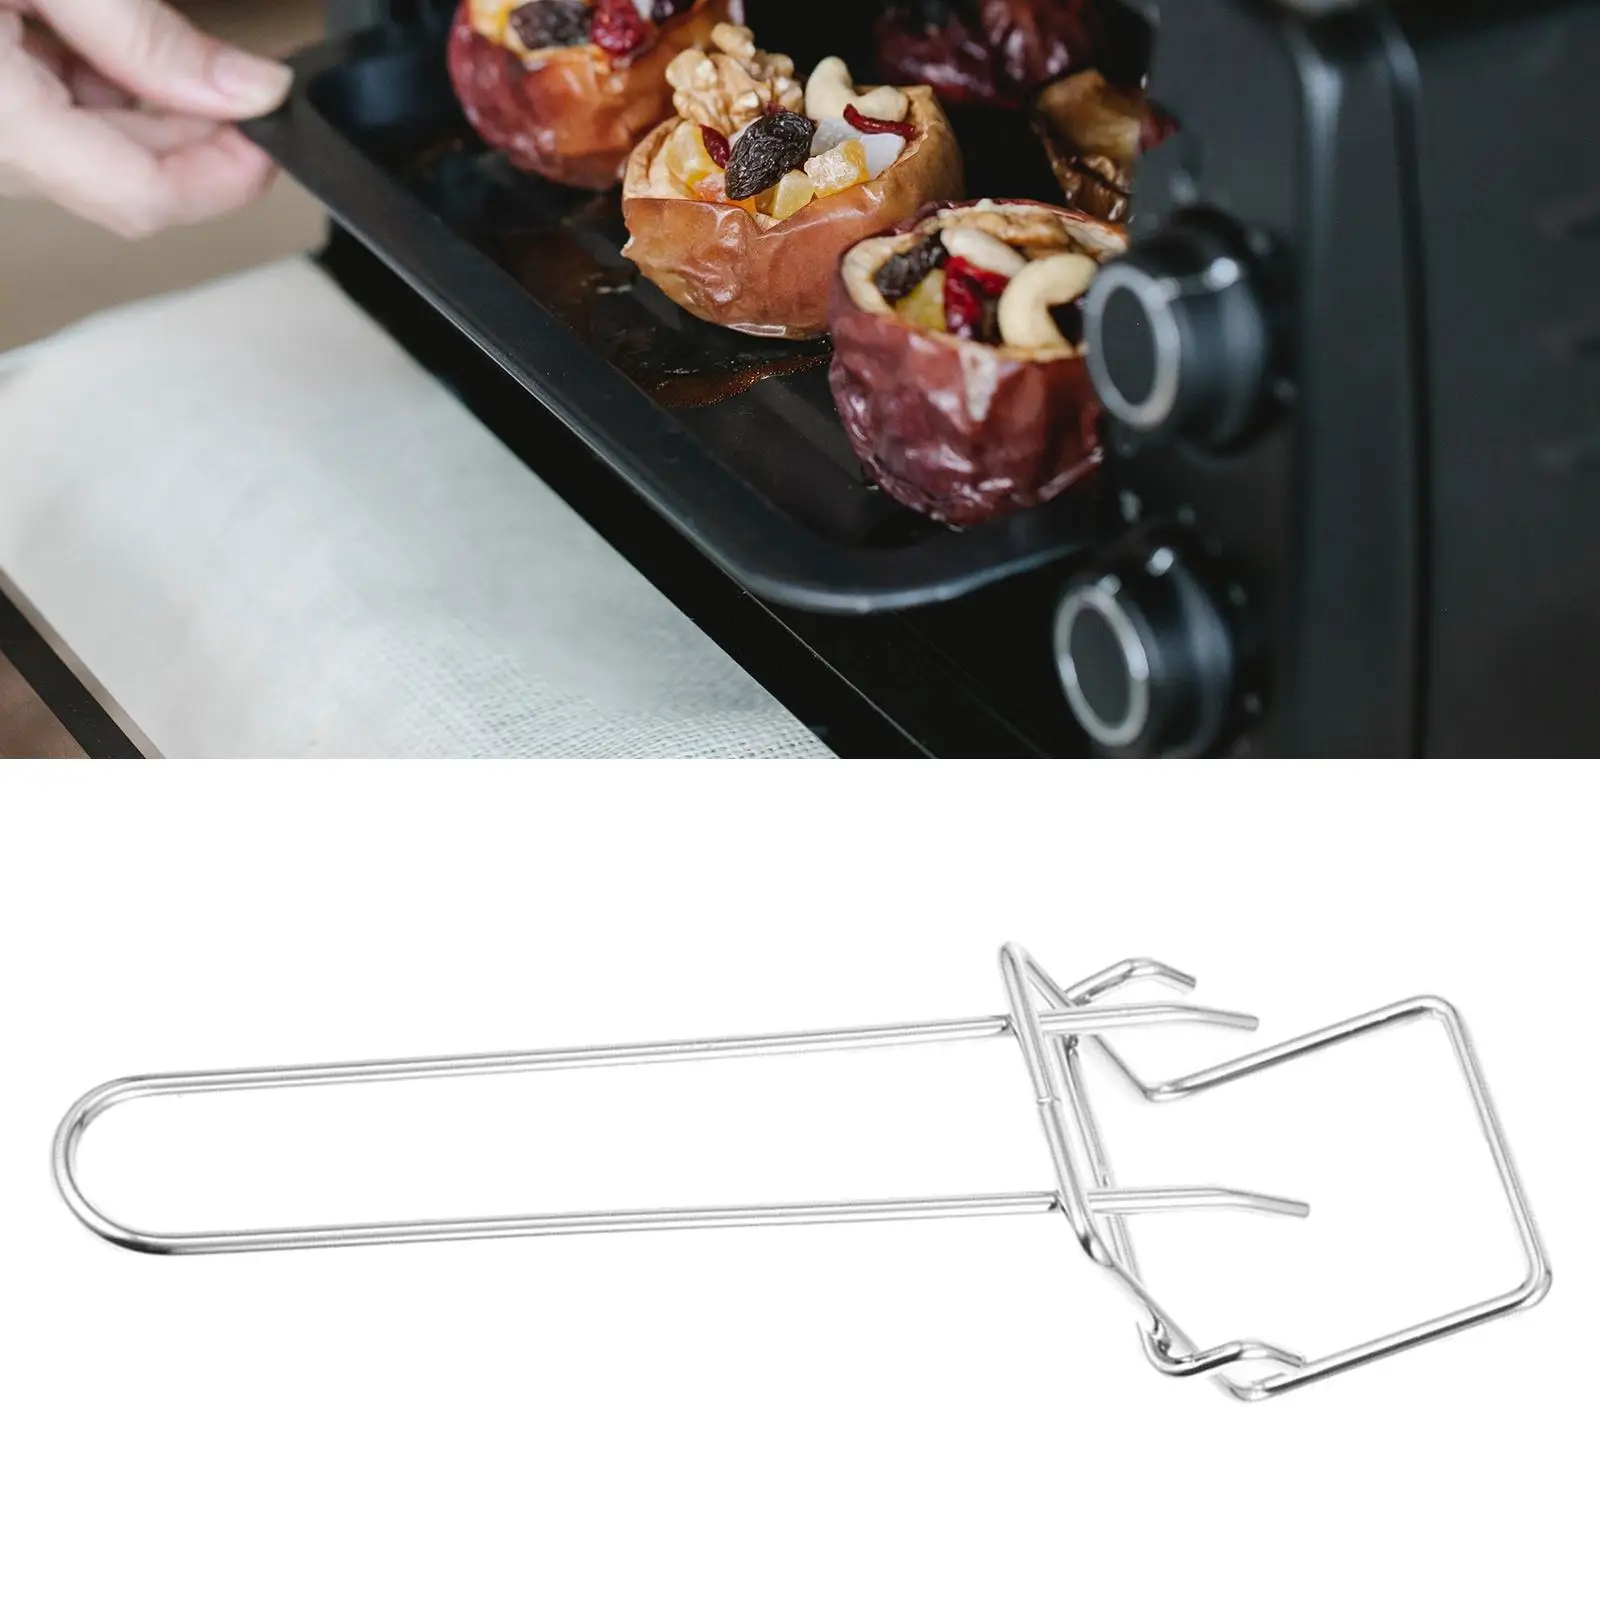 Tongs Pan Anti Scald Pot Convenient Stainless Steel Practical Bowl Clip Picker